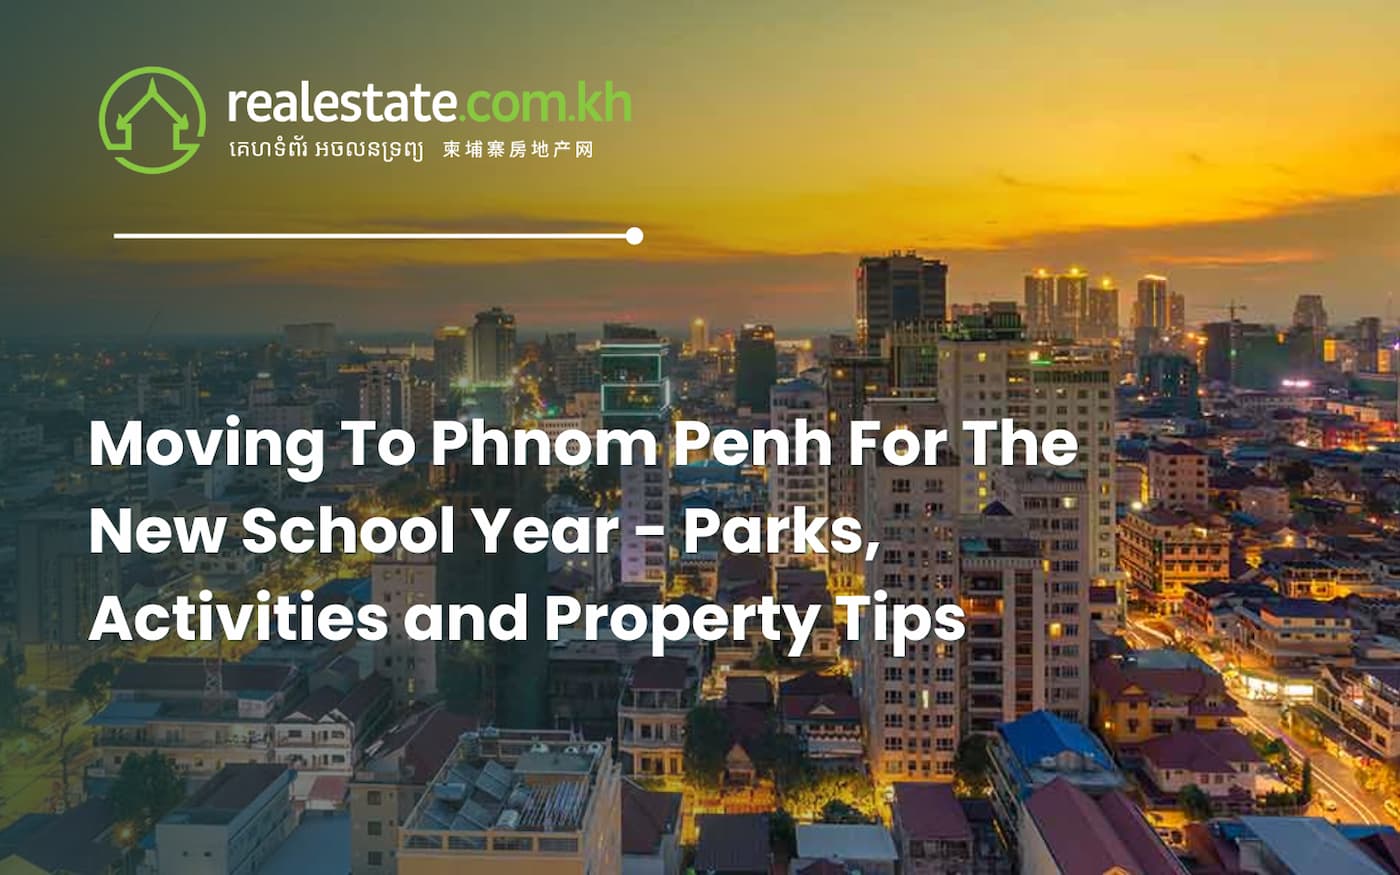 Moving To Phnom Penh For The New School Year - Parks, Activities and Property Tips